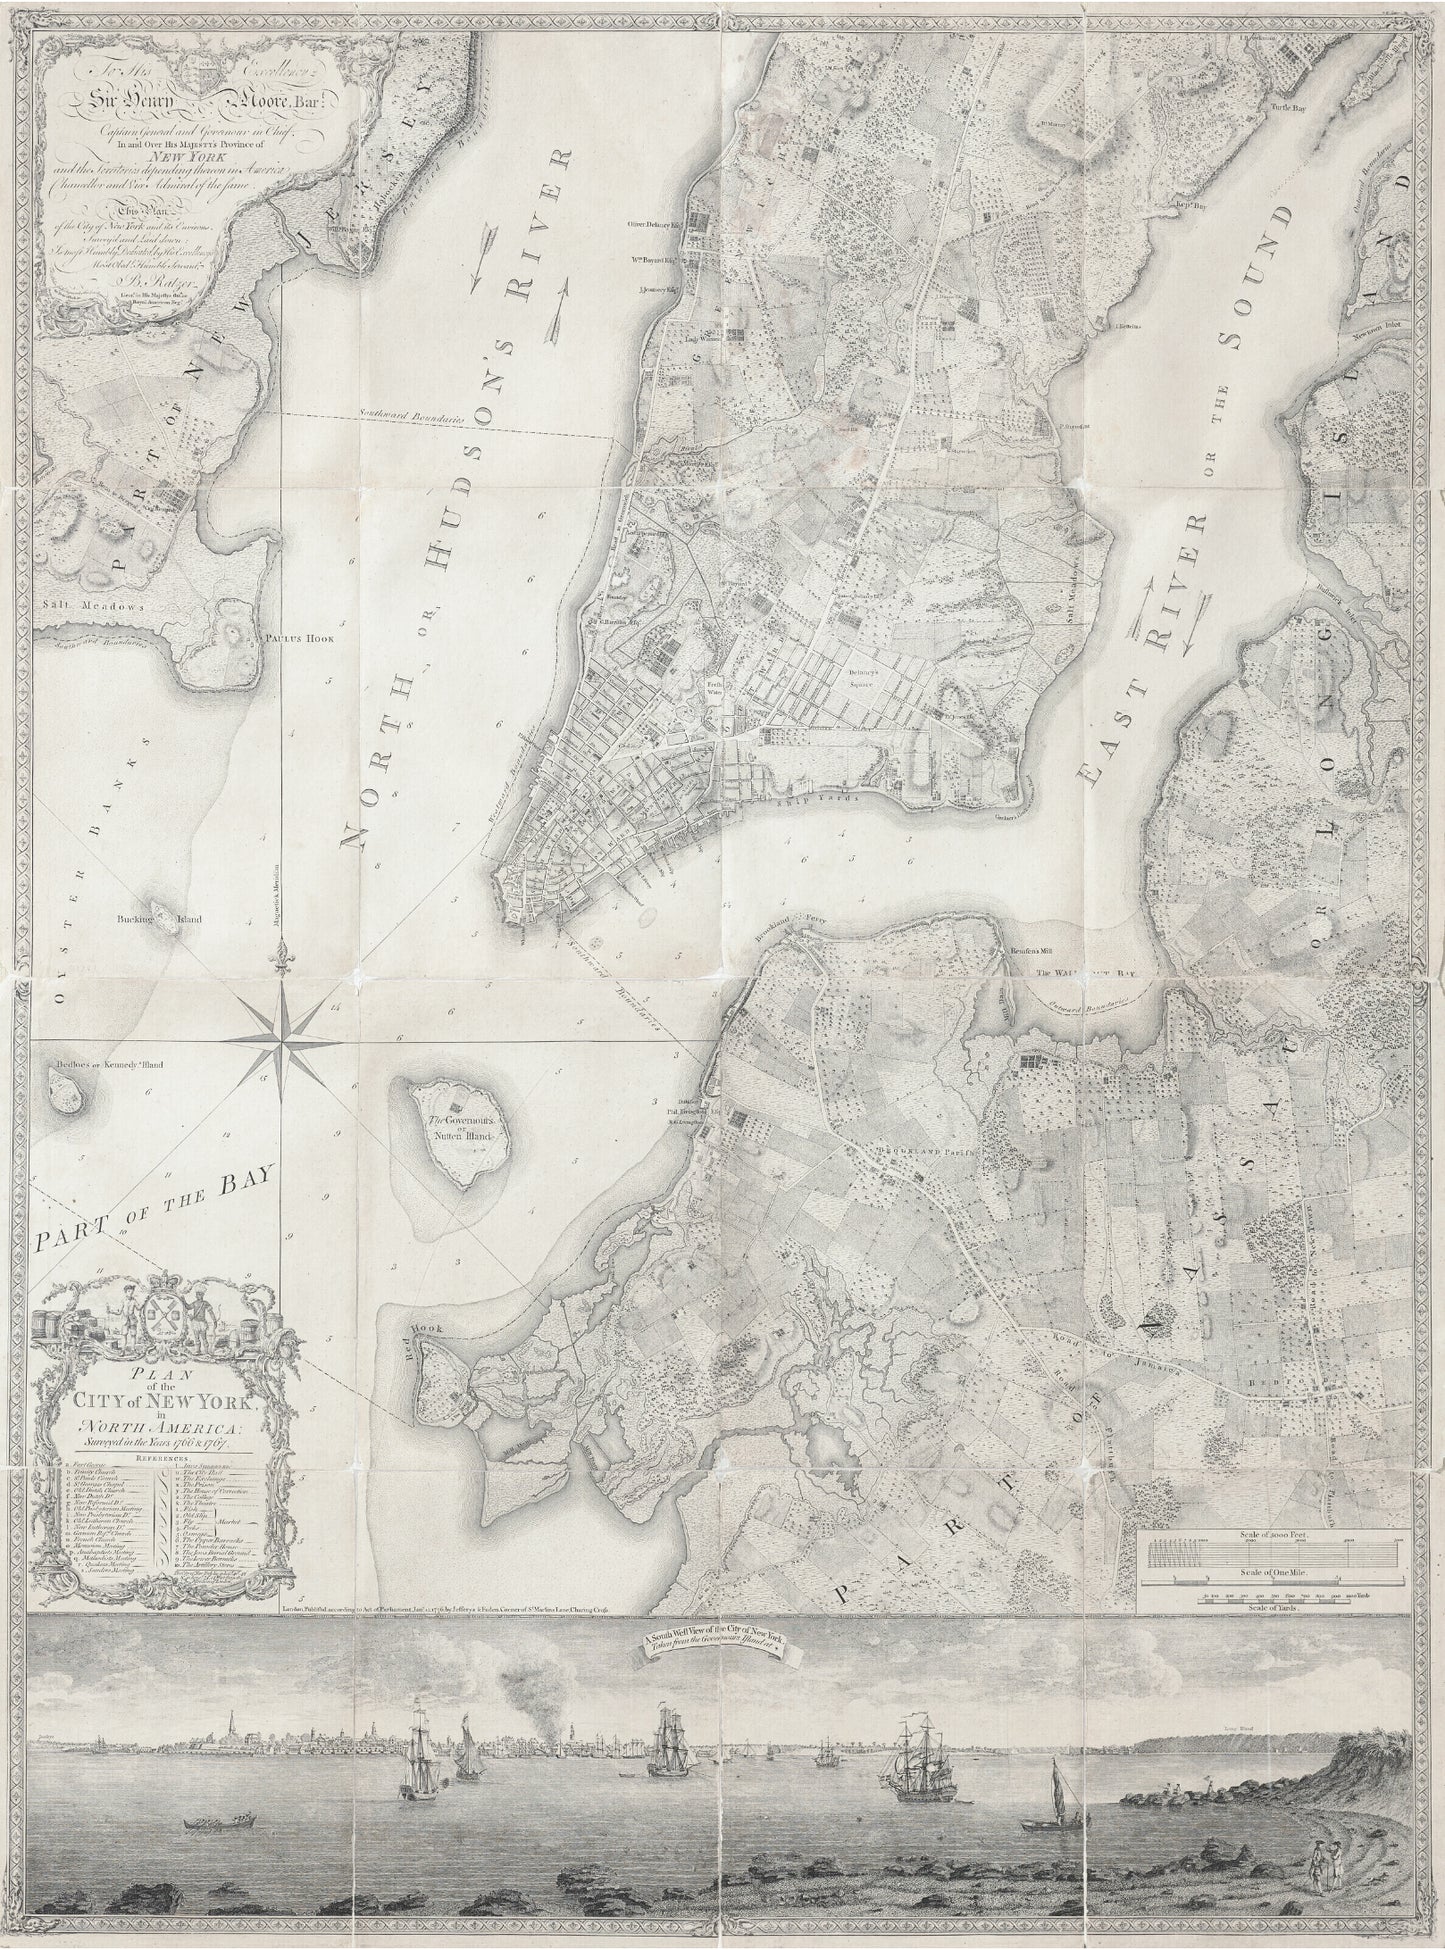 RATZER, BERNARD ( fl. 1756-1777)  Plan‌ ‌of‌ ‌the‌ ‌City‌ ‌of‌ ‌New‌ ‌York‌ ‌in‌ ‌North‌ ‌America,‌ ‌surveyed‌ ‌in‌ ‌the‌ ‌years‌ ‌1766‌ ‌&‌ ‌1767.‌